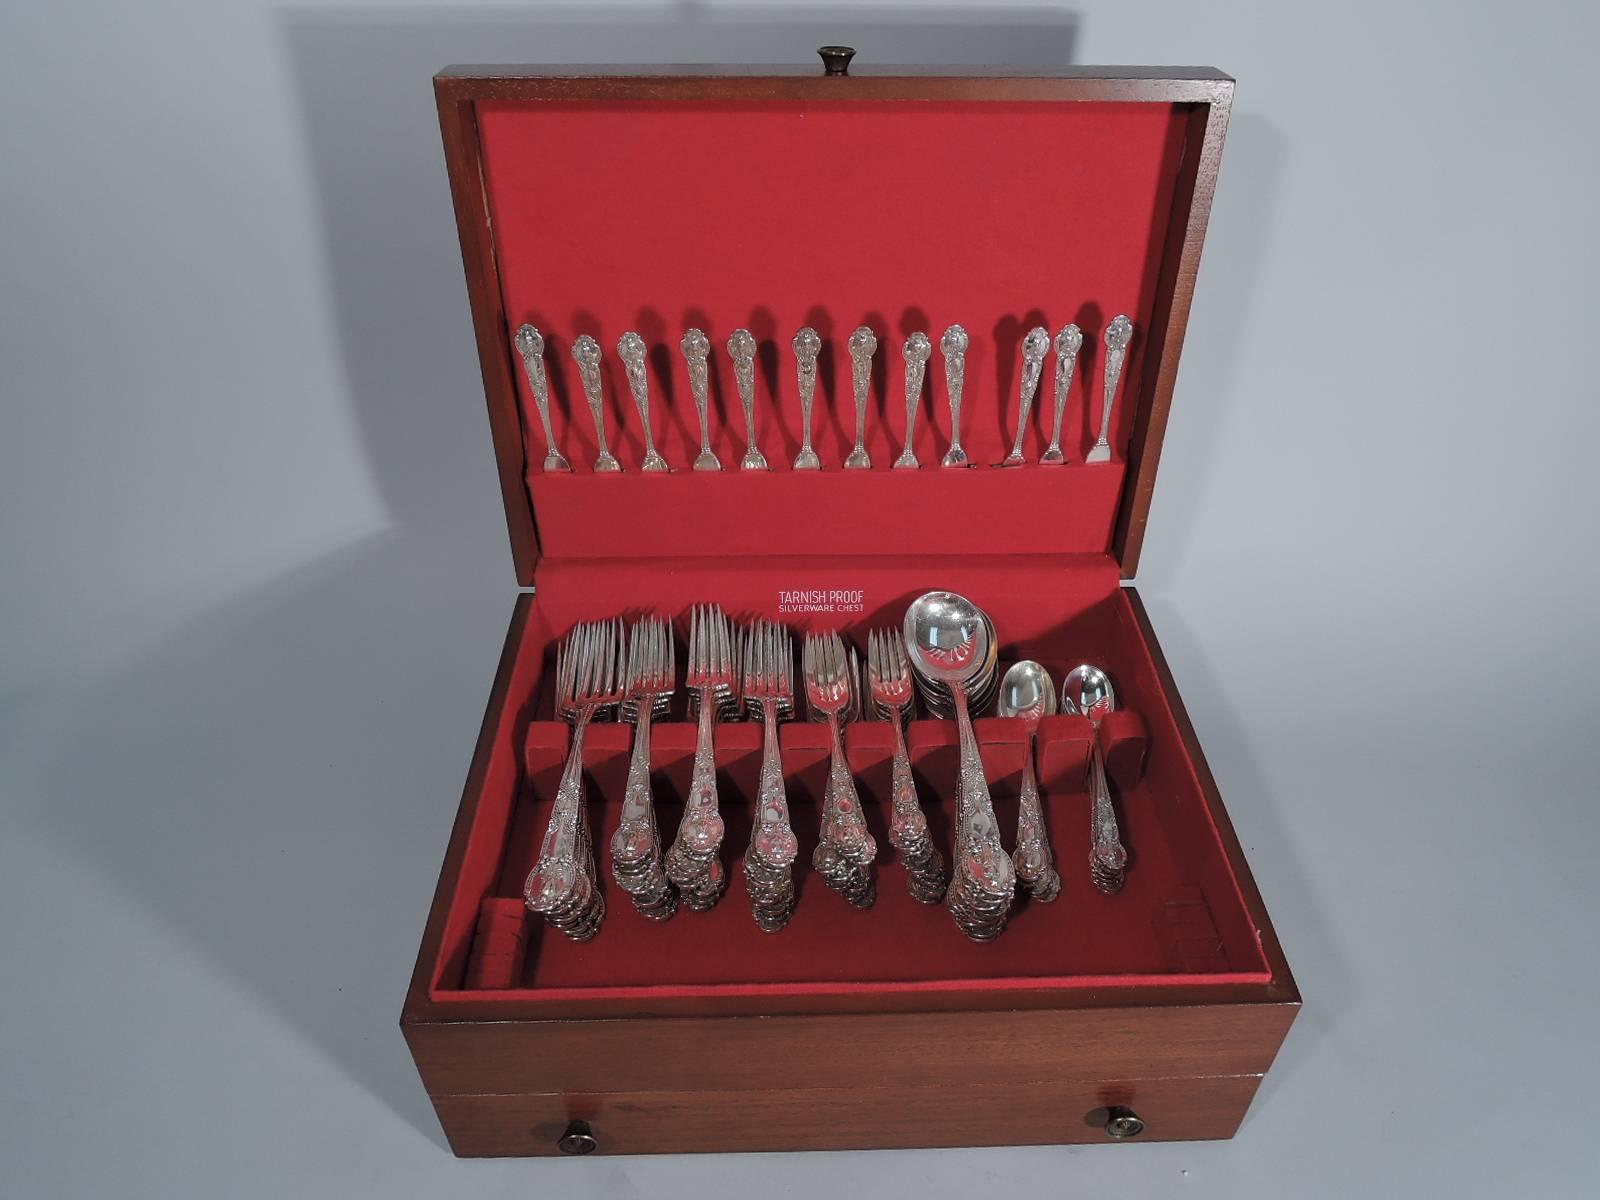 Group of antique sterling silver flatware pieces in Renaissance pattern. Made by Tiffany & Co. in New York.

This group comprises 111 pieces (dimensions in inches): 15 butter knives (6 1/8); Forks: Six dinner forks (7 7/8), 27 forks (6 7/8) and 18